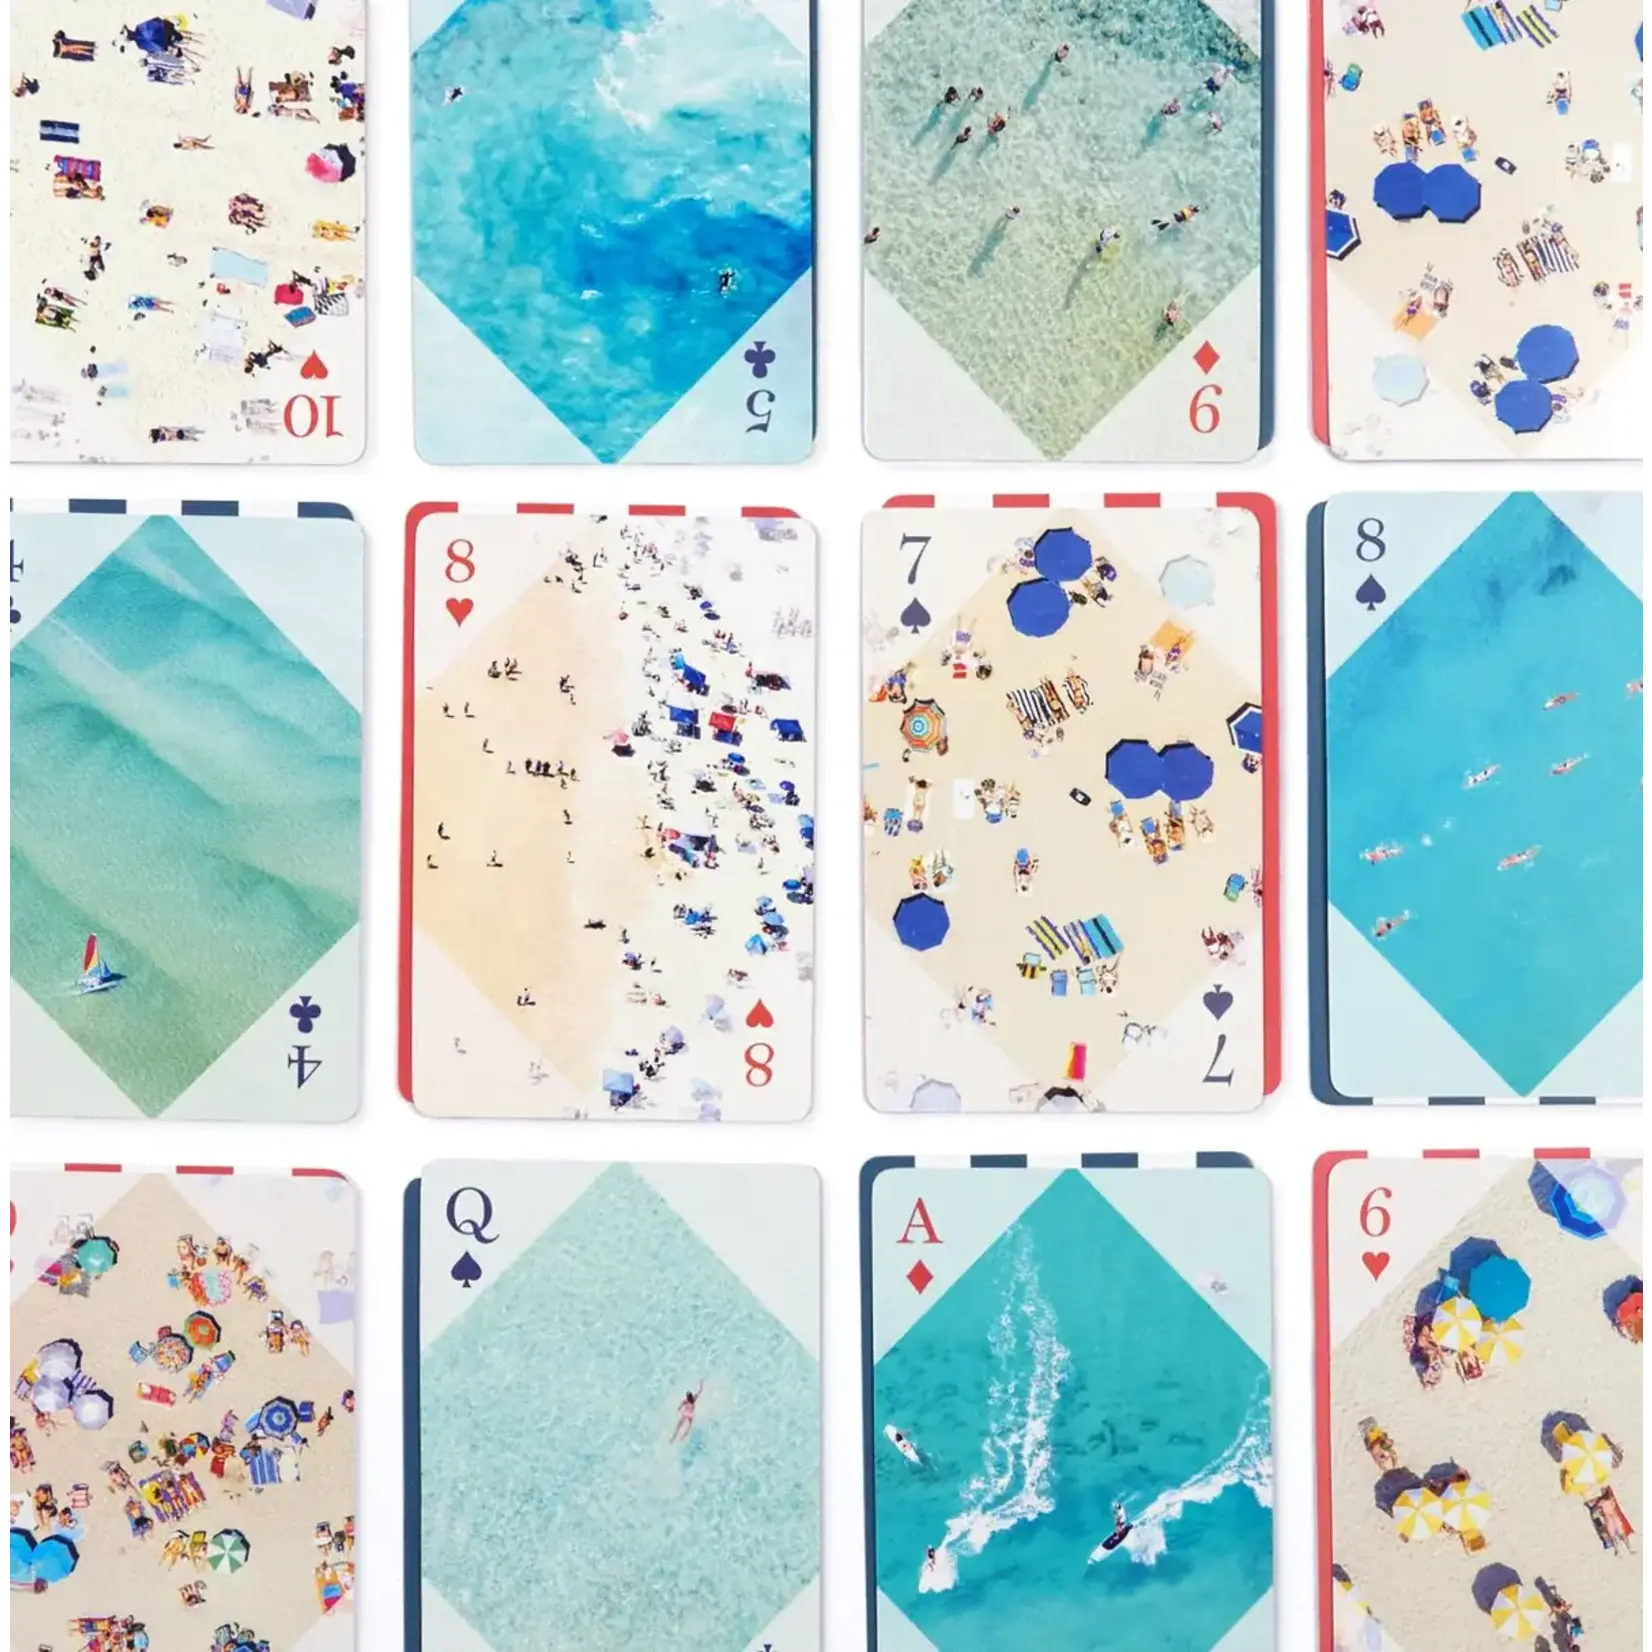 Outside The Box The Beach Playing Card Set By Gray Malin